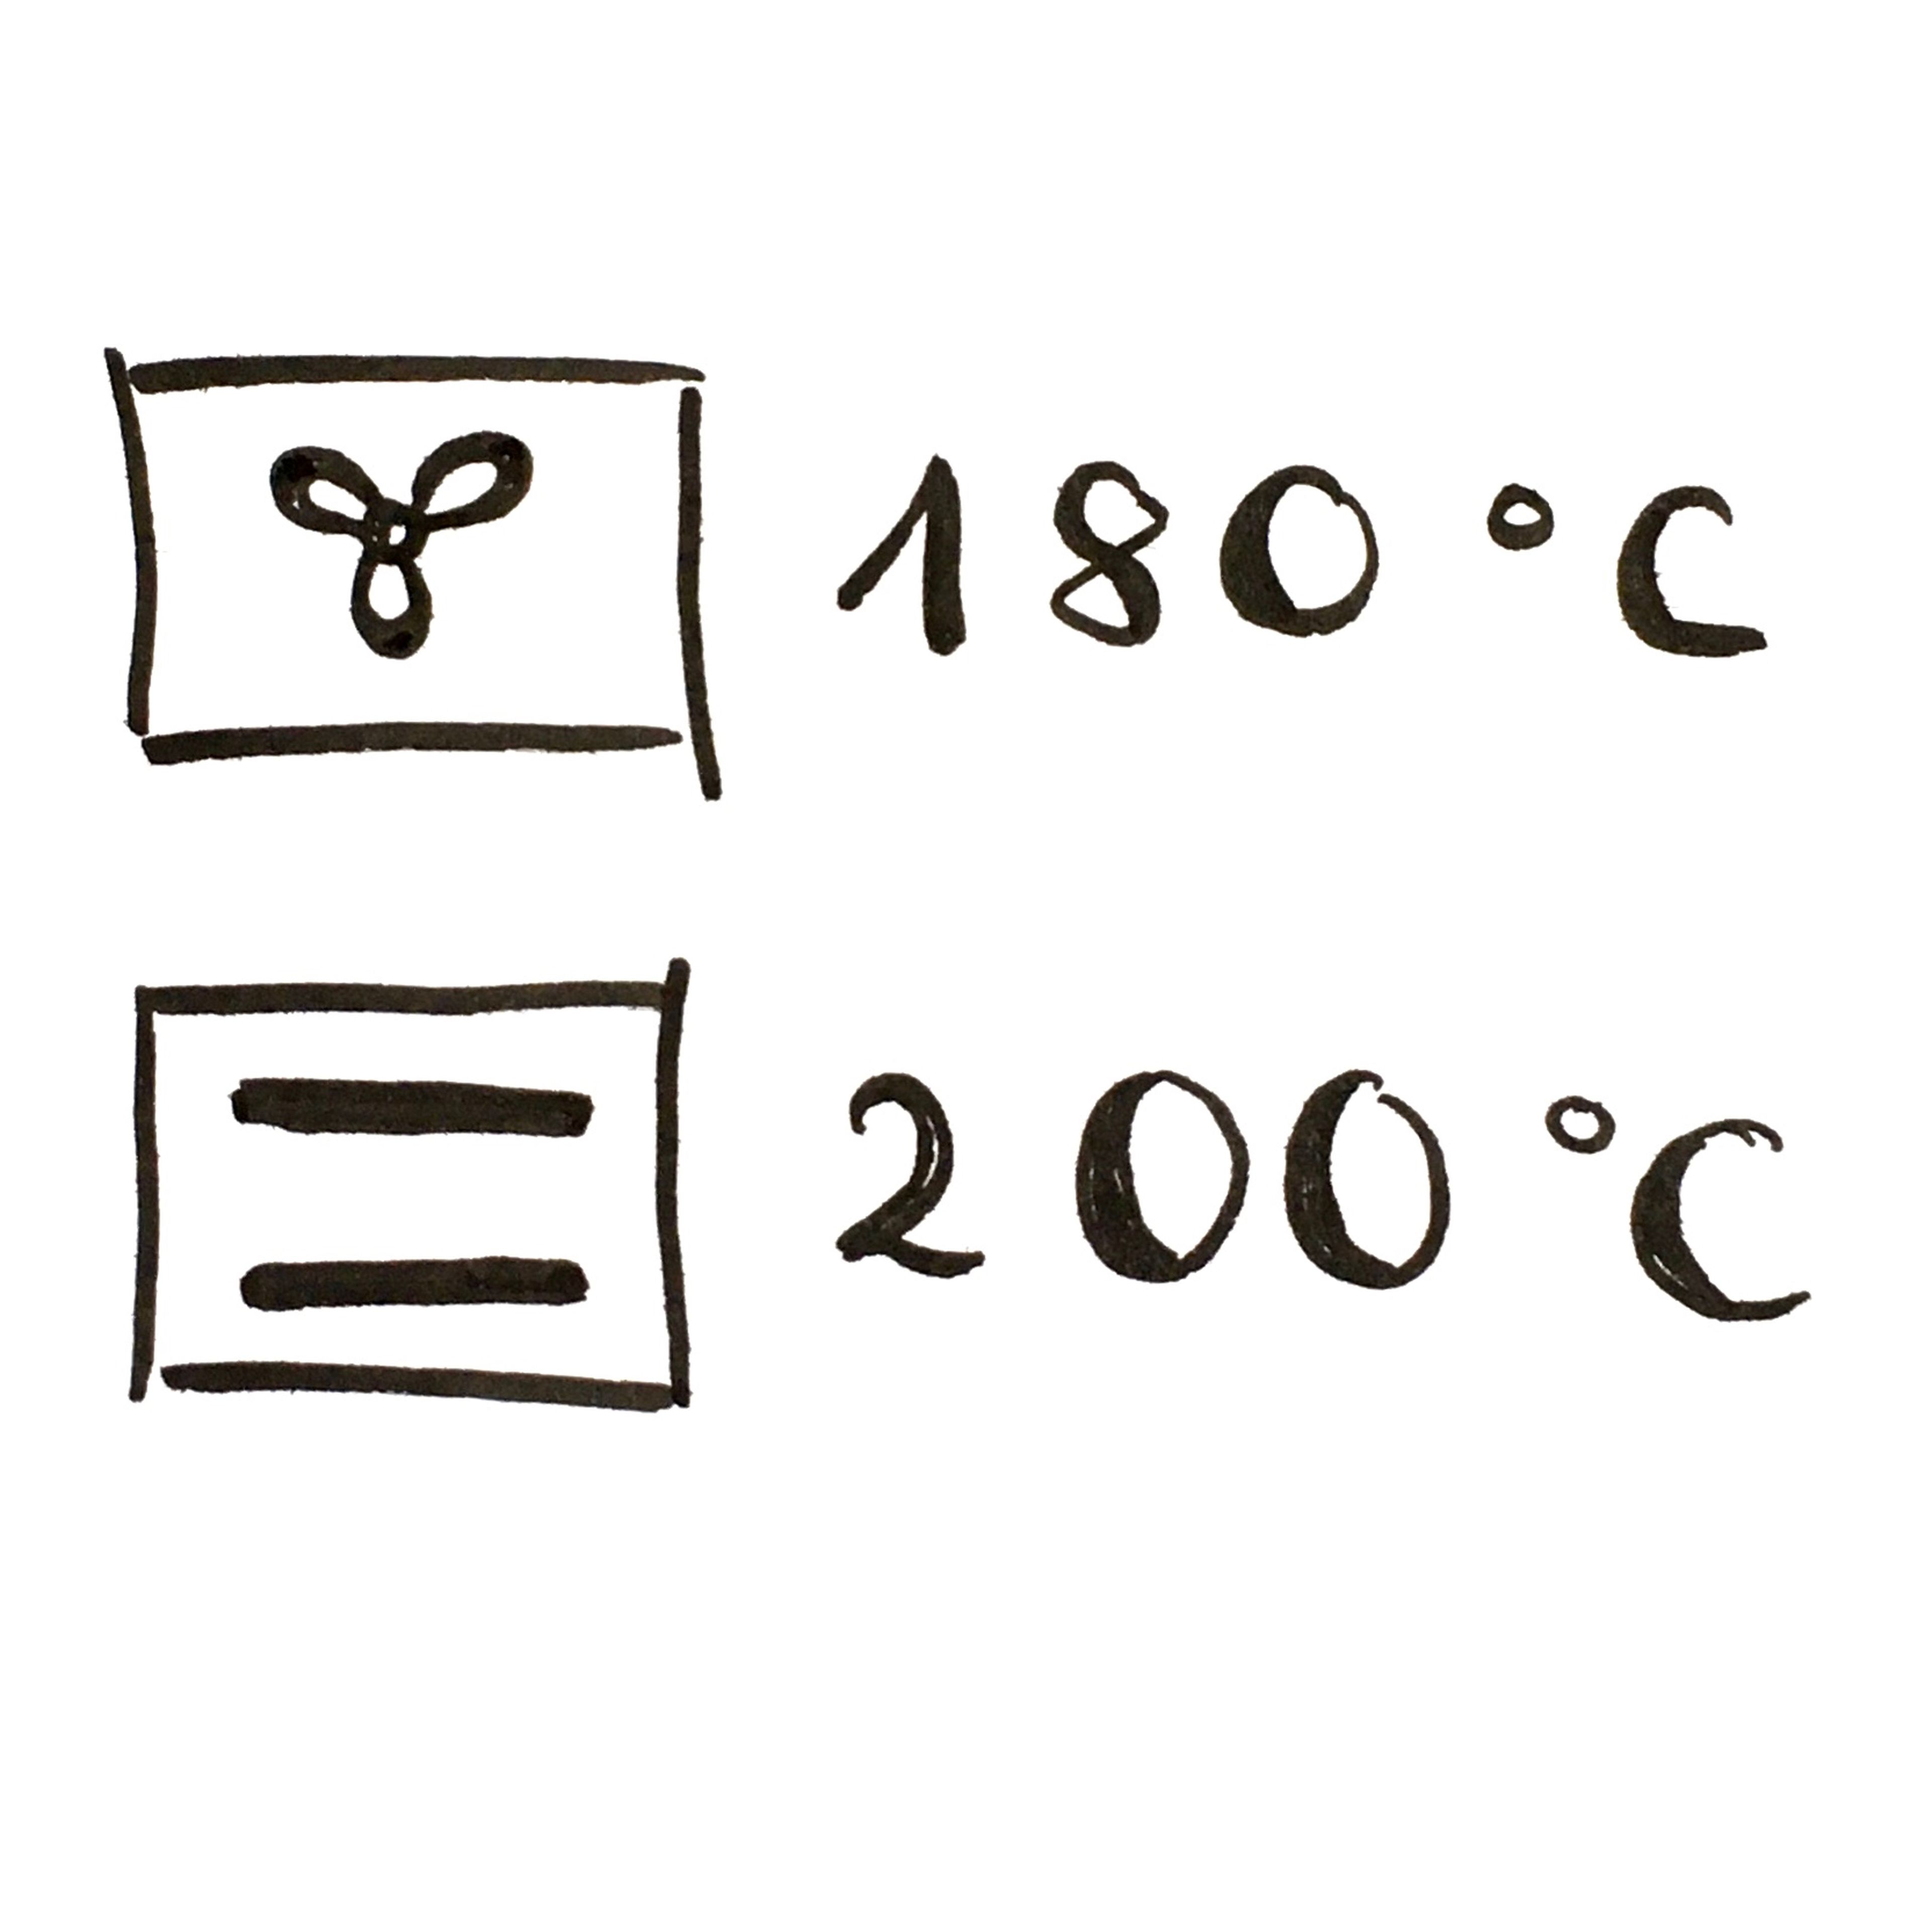 Preheat oven to 200°C/390°F top-bottom heat or 180°C/350°F convection heat.